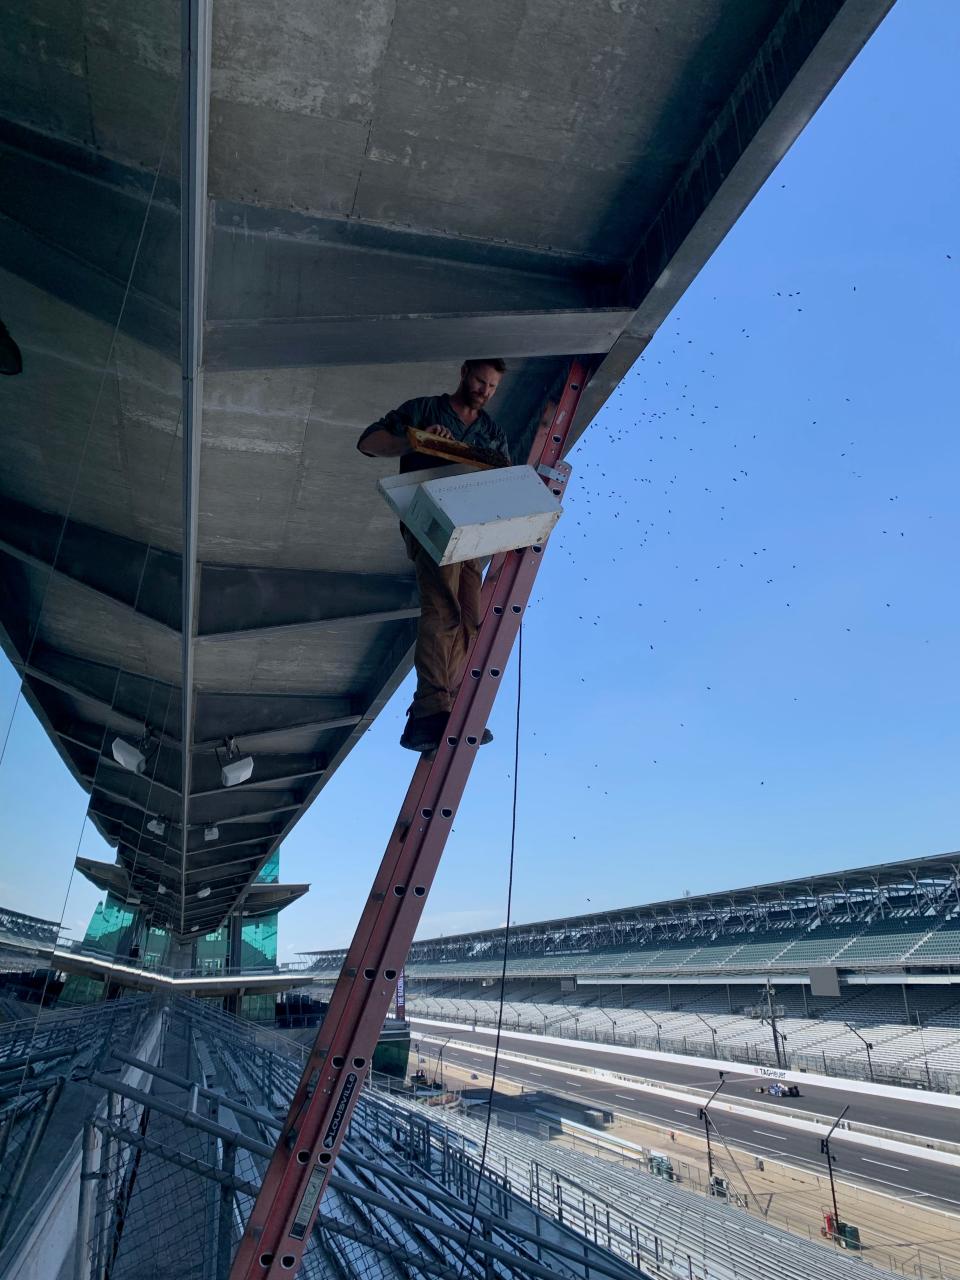 Beekeeper Ross Harding climbs a ladder at the Indianapolis Motor Speedway to collect a swarm of bees after the 2023 Indy 500.